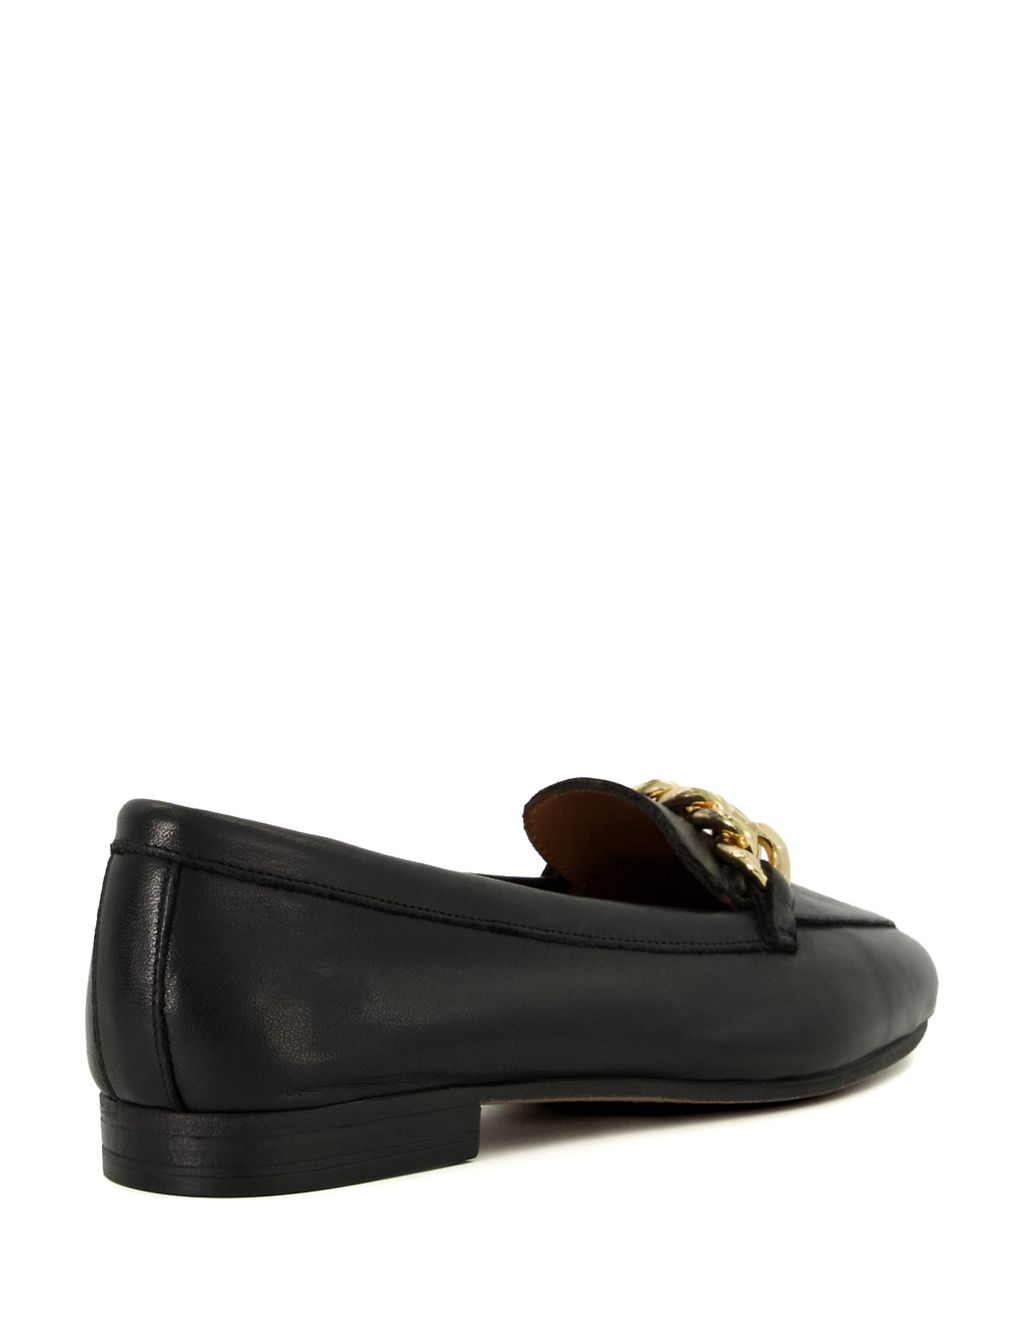 Wide Fit Leather Chain Detail Flat Loafers | Dune London | M&S